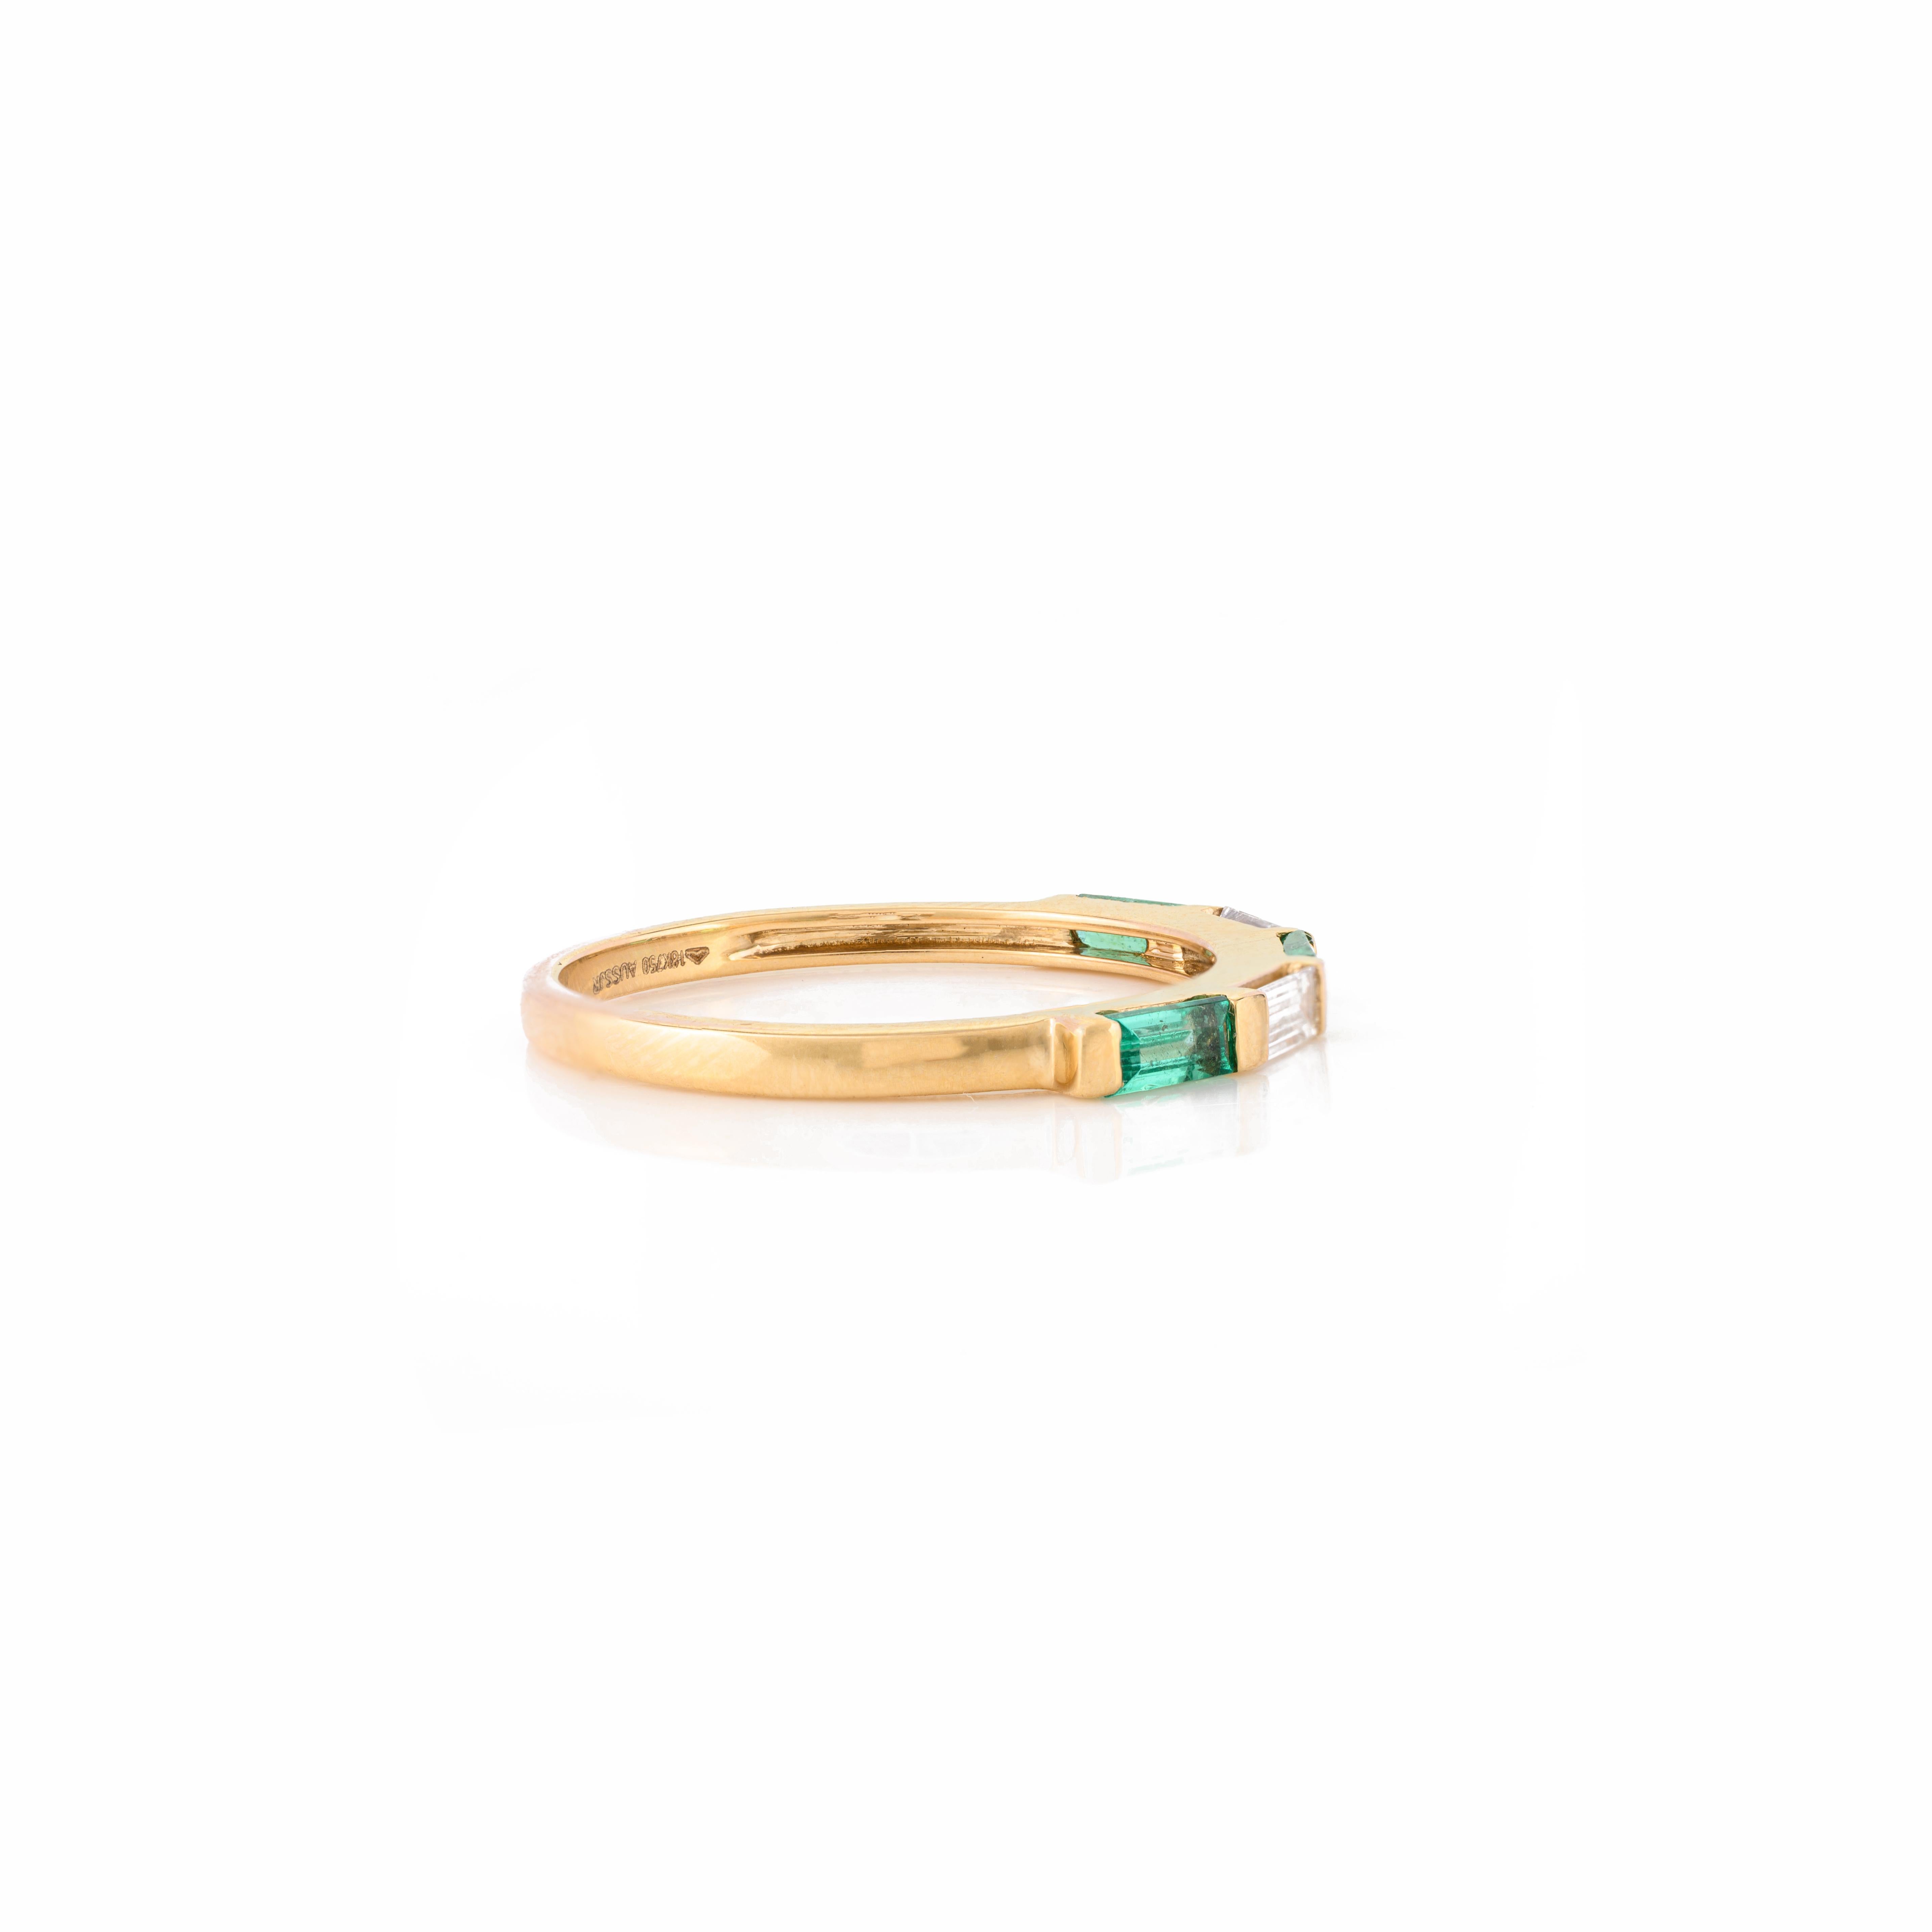 For Sale:  Alternate Baguette Emerald Diamond Stackable Band Ring in 18k Yellow Gold 8